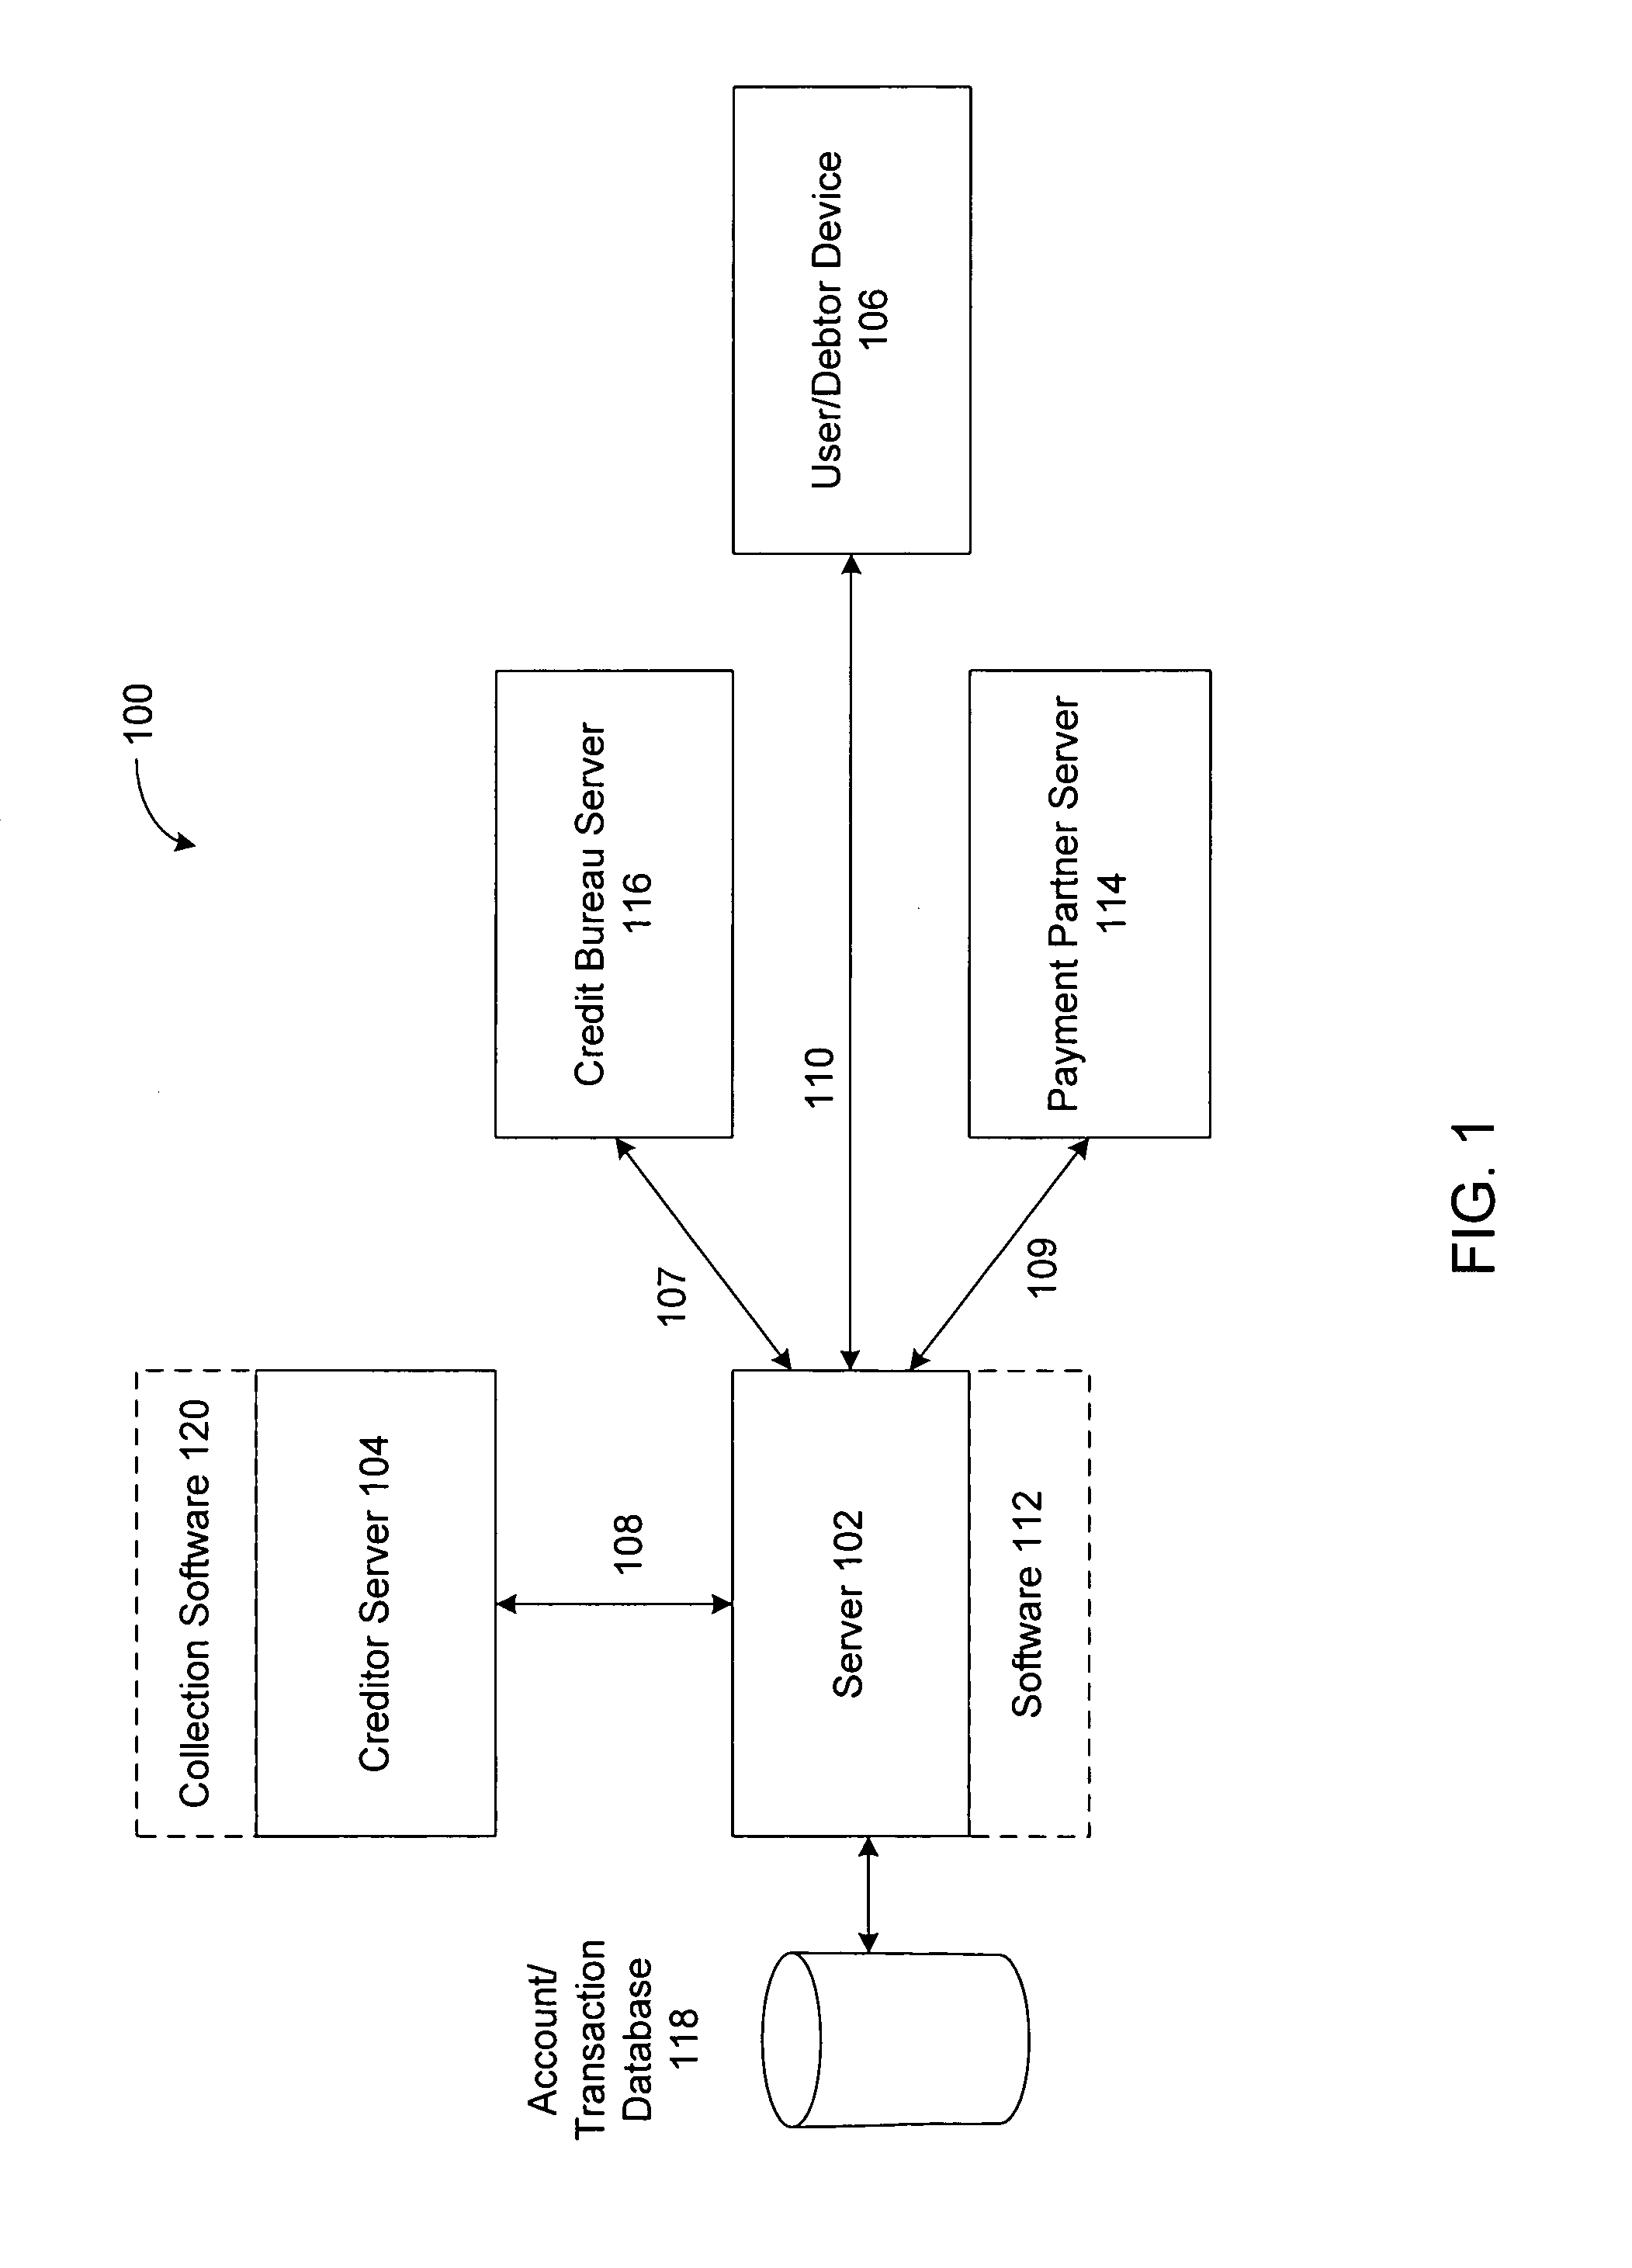 System and method for resolving transactions with lump sum payment capabilities